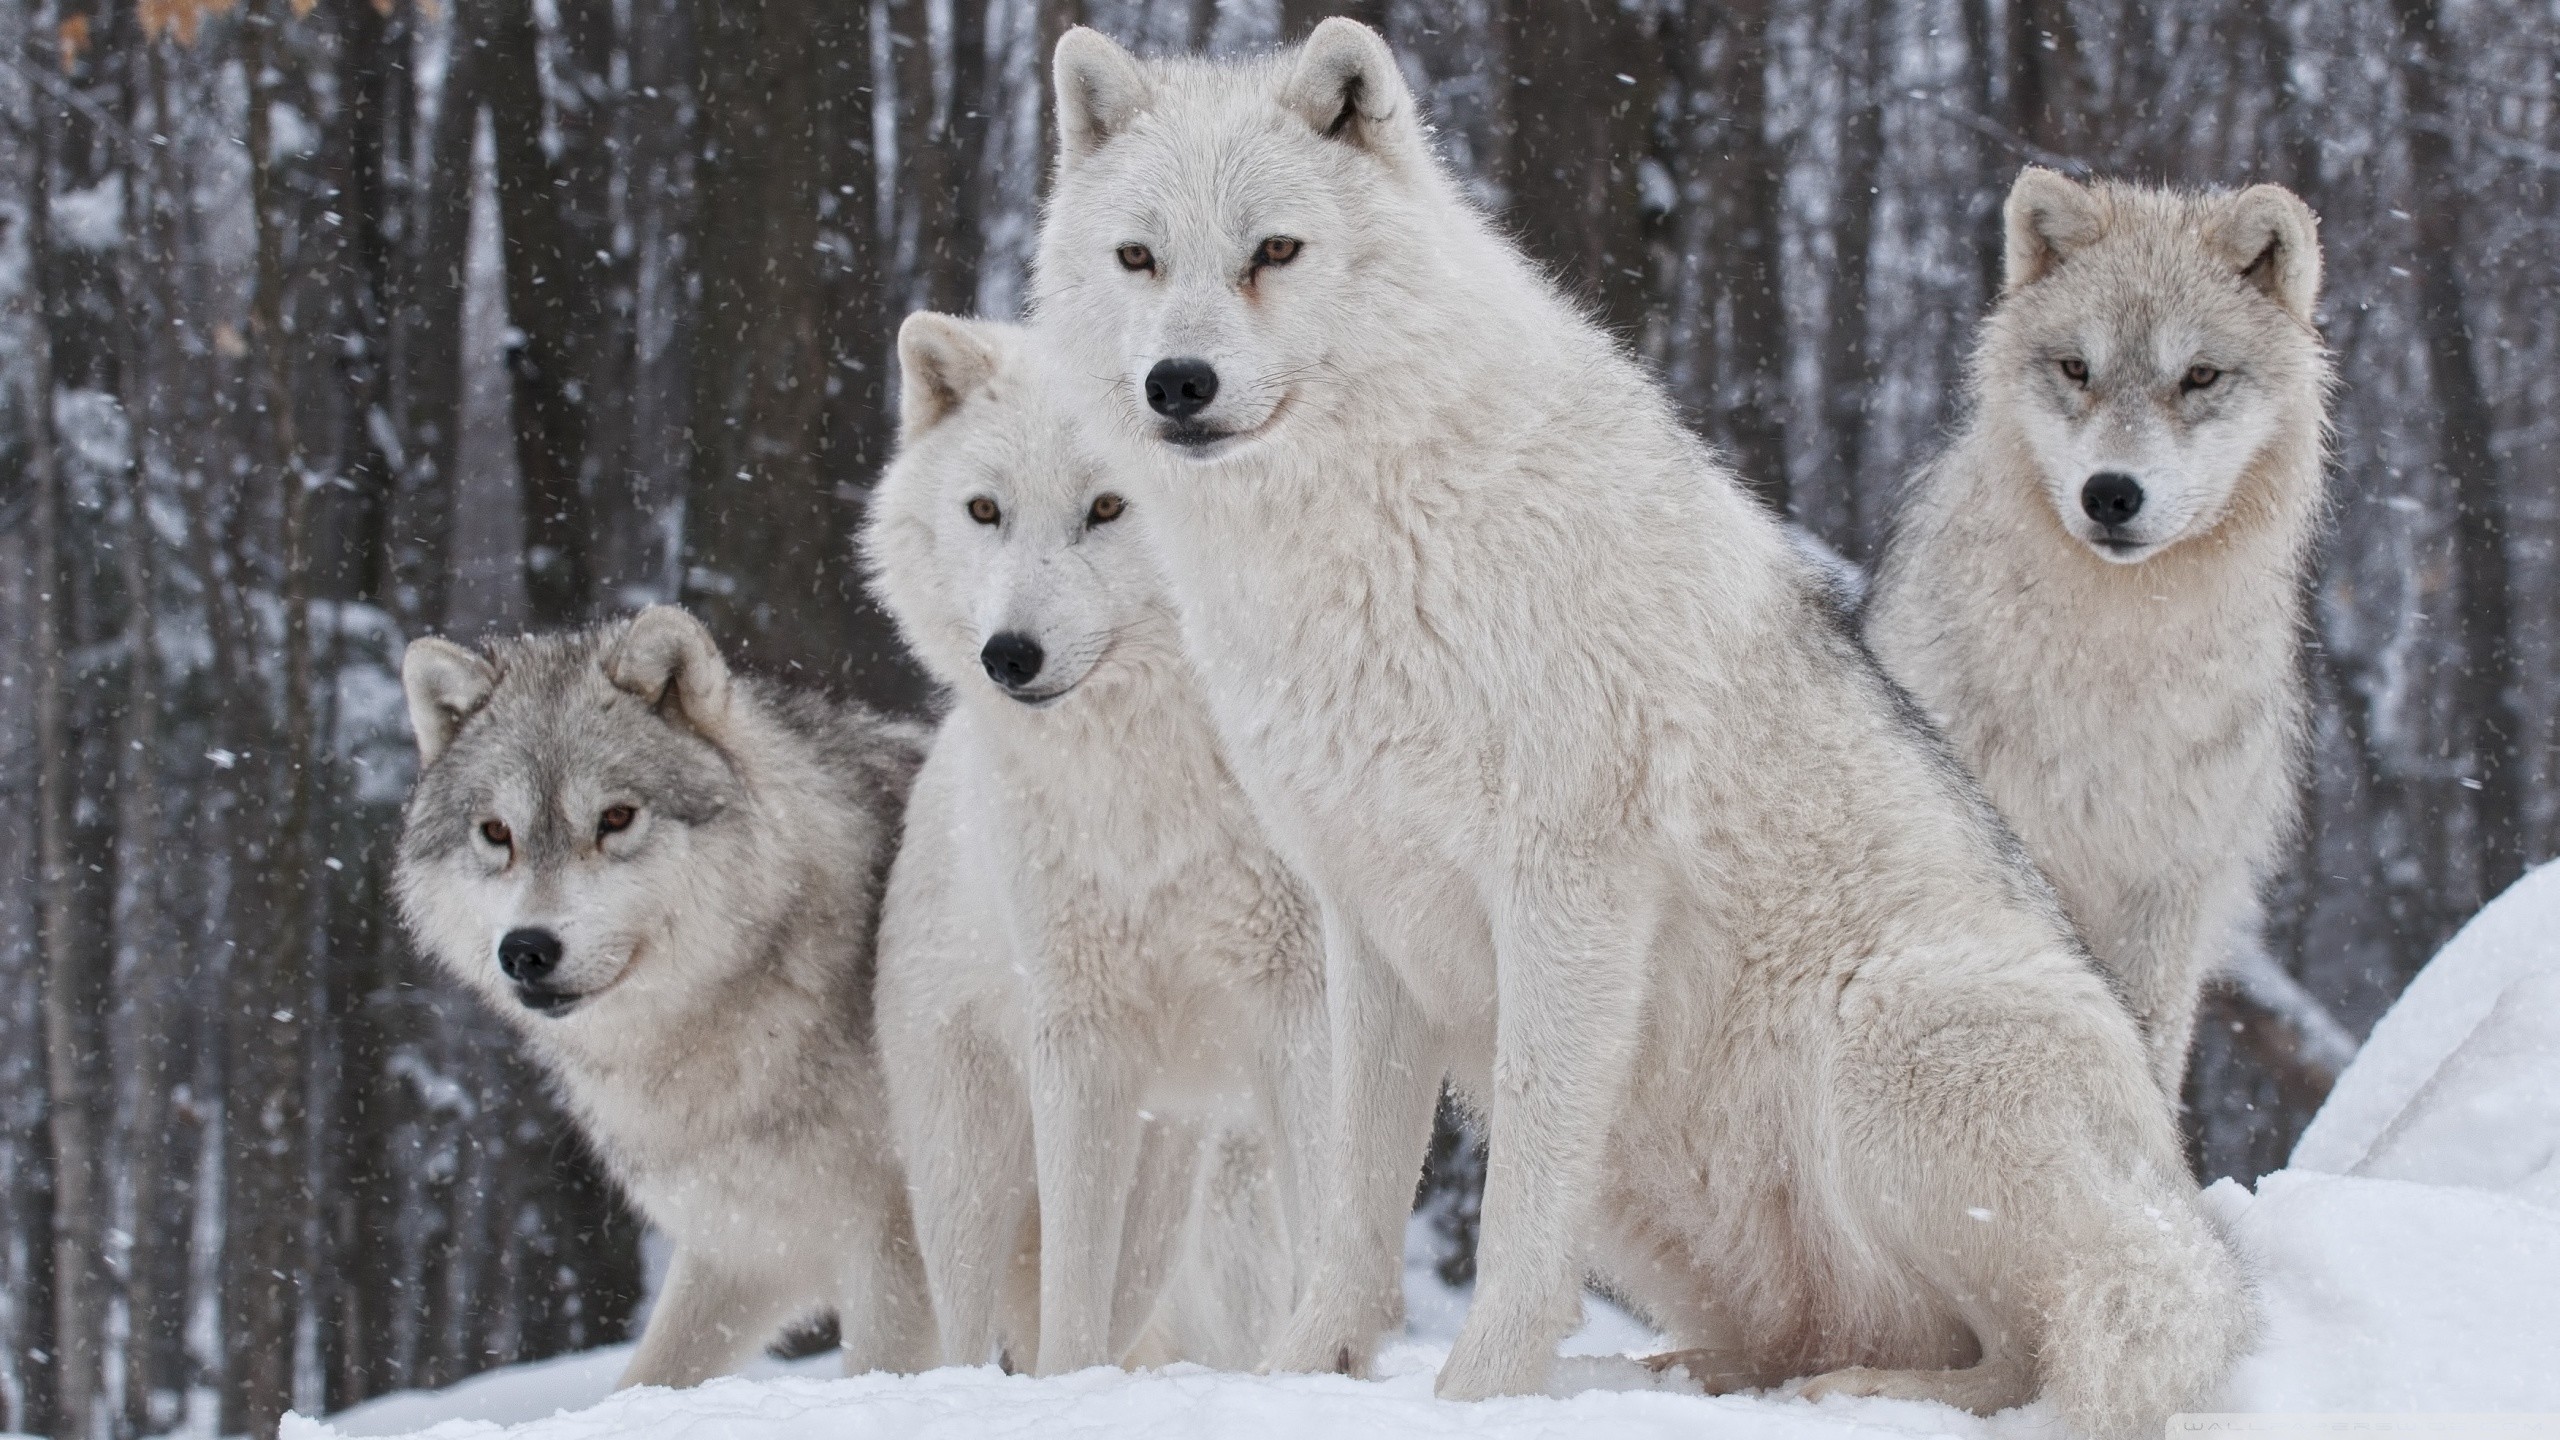 2560x1440 Wolf HD Wallpapers Backgrounds Wallpaper | HD Wallpapers | Pinterest | Wolf  wallpaper, Wallpaper and Wallpapers android